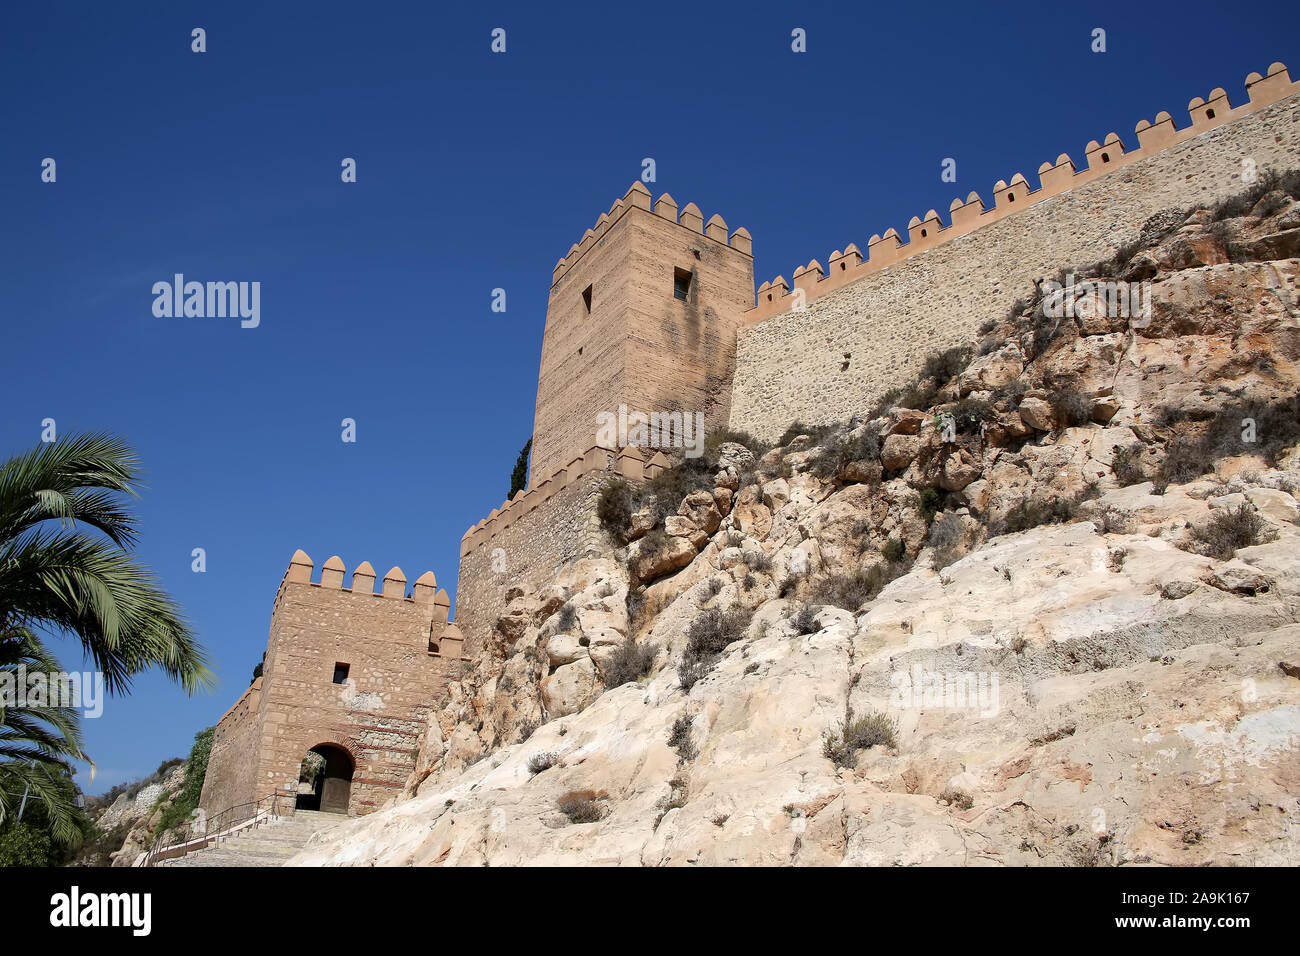 Entrance to the Alcazaba Castle, looking at the fortified walls & gateway, Almeria Spain Stock Photo